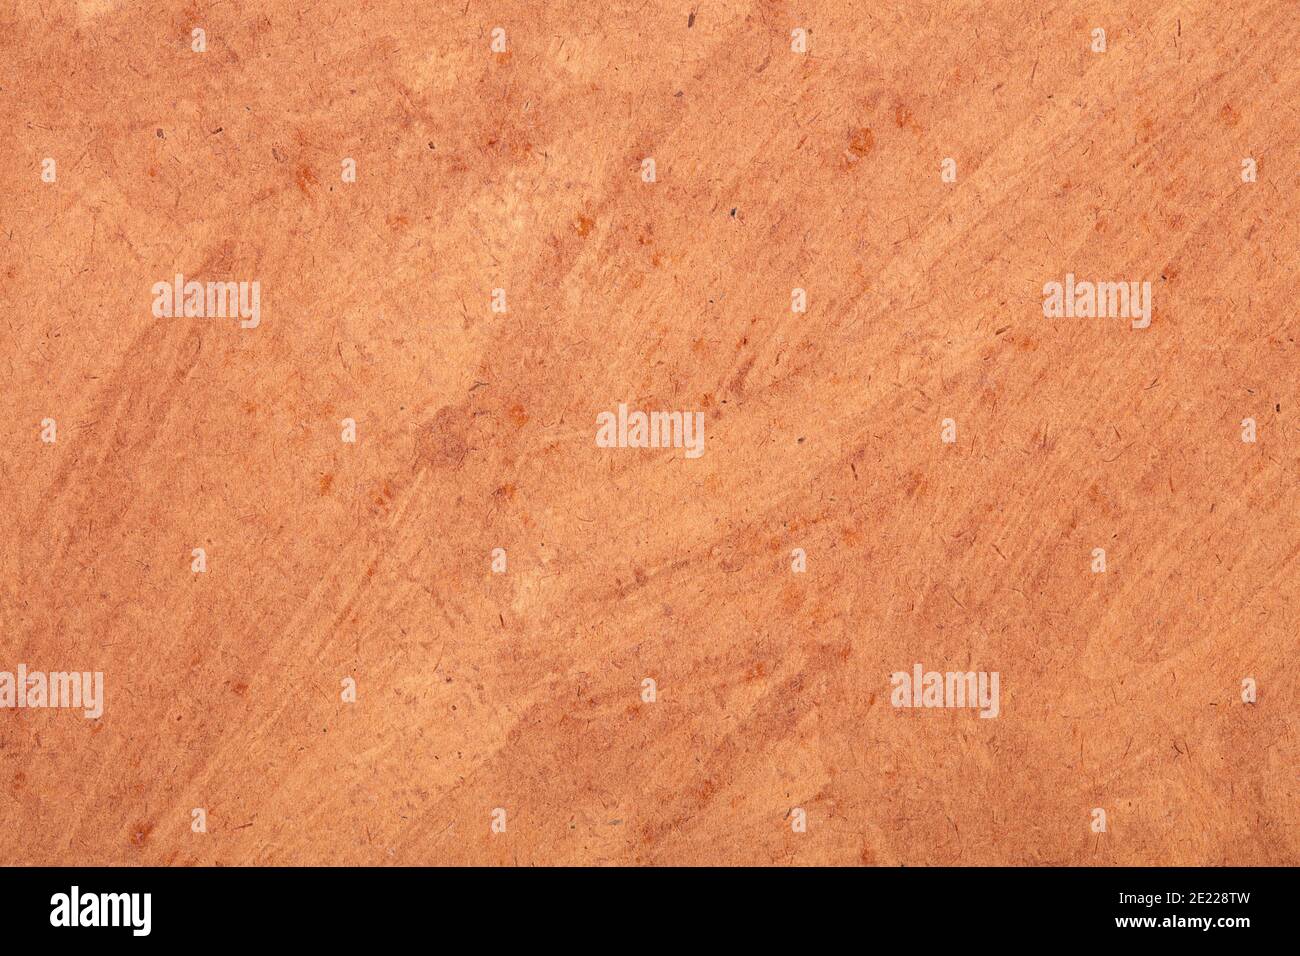 Beige paper with brush strokes and dust, texture background Stock Photo